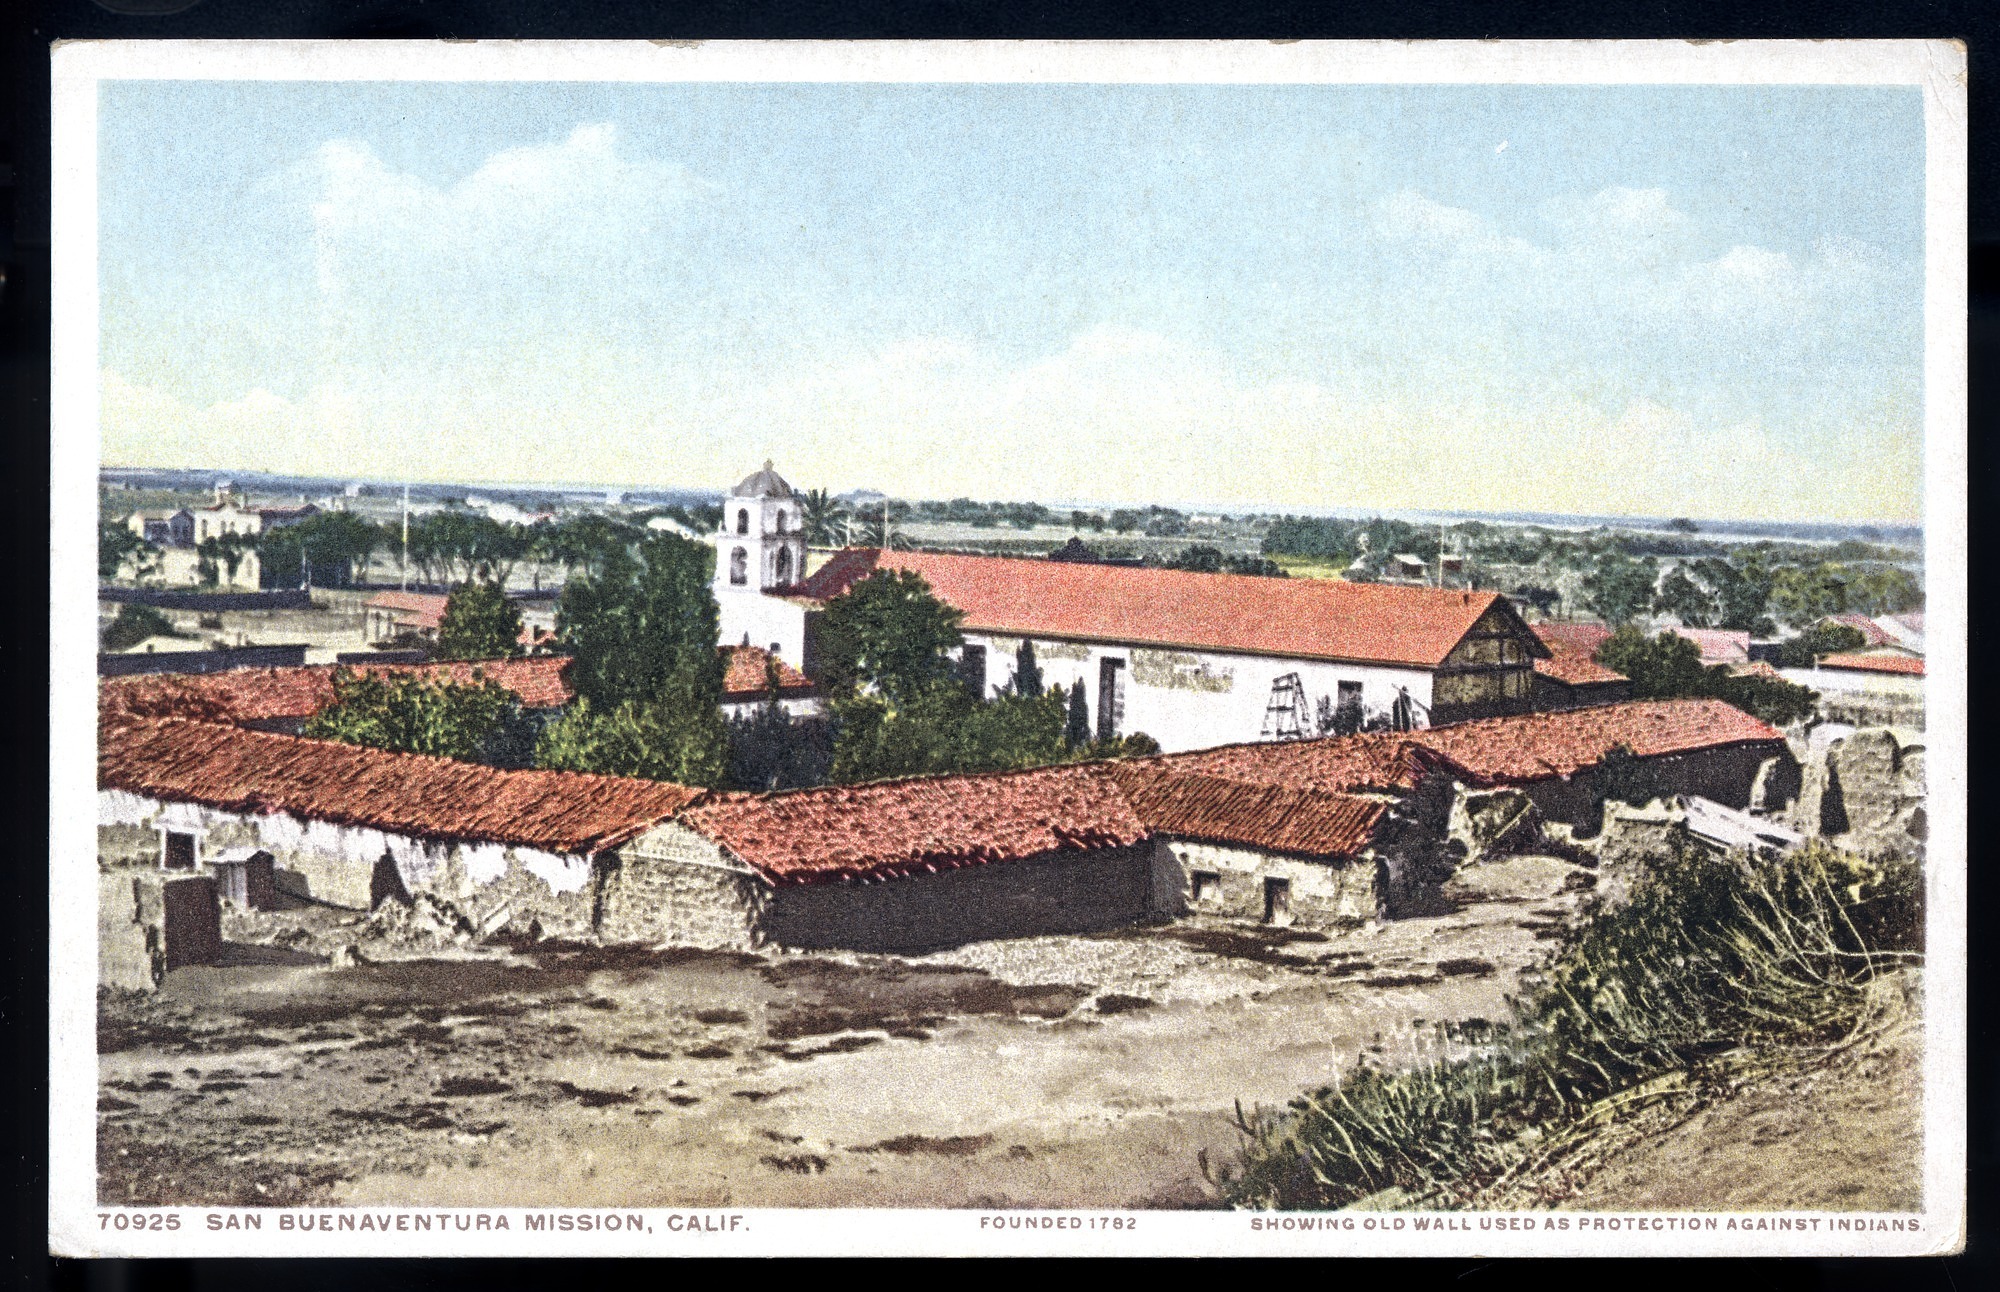 Postcard 33 – San Buenaventura Mission, Calif., Founded 1782, Showing Old Wall Used as Protection Against Indians. Detroit Publishing Company. ca 1910. NMAH 1986.0639.2048.